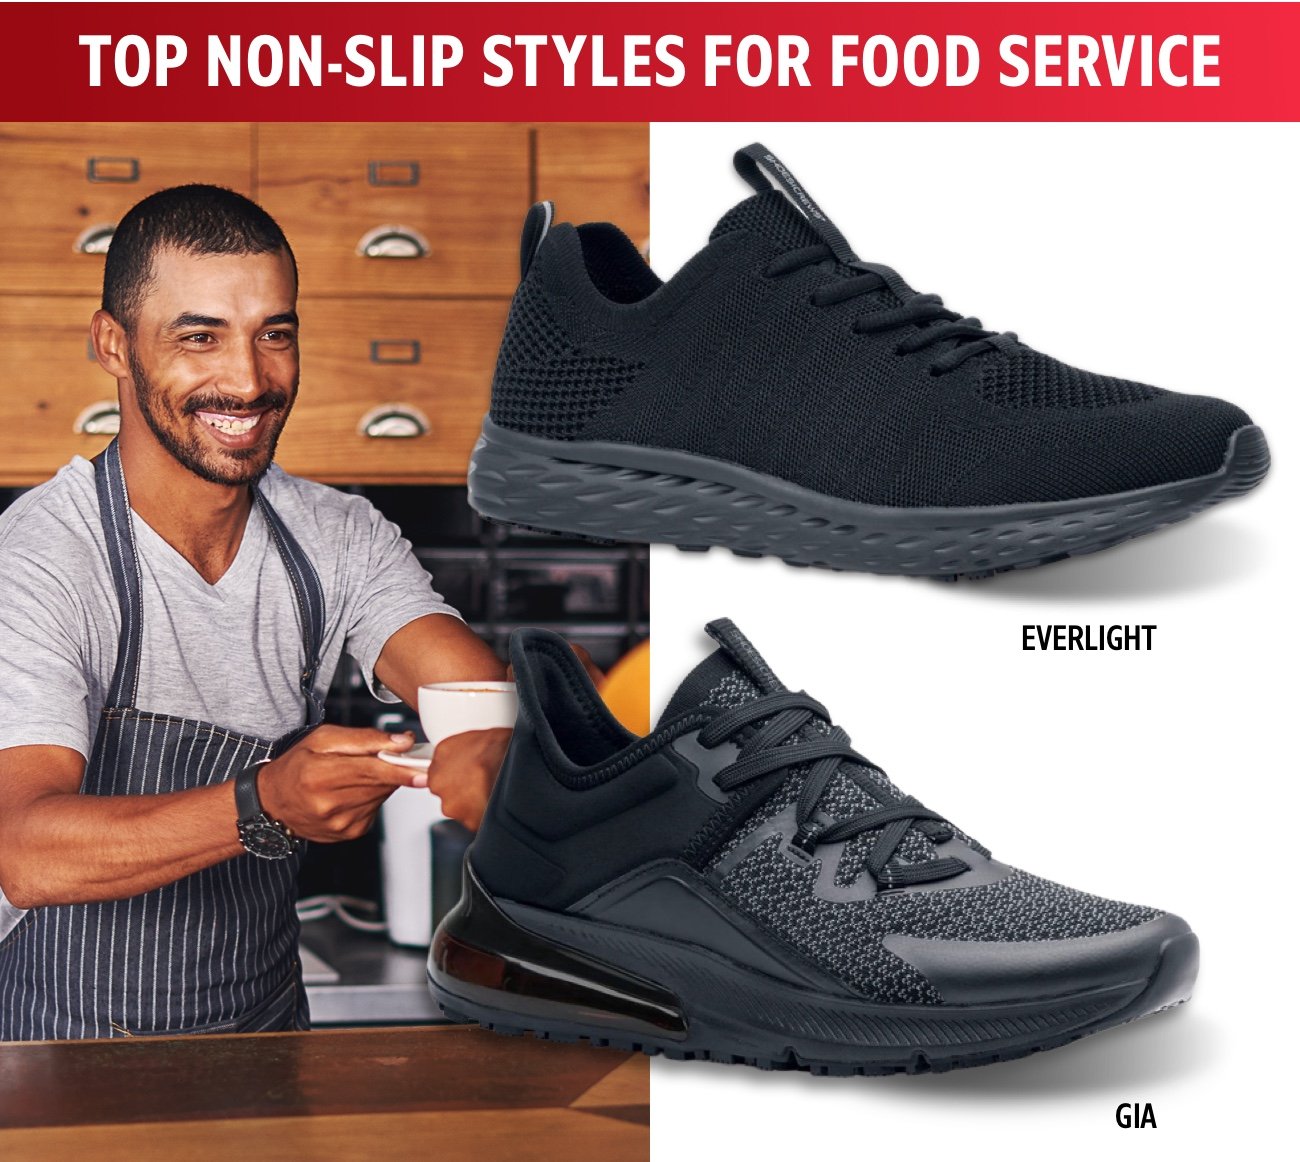 Shop Foodservice Styles